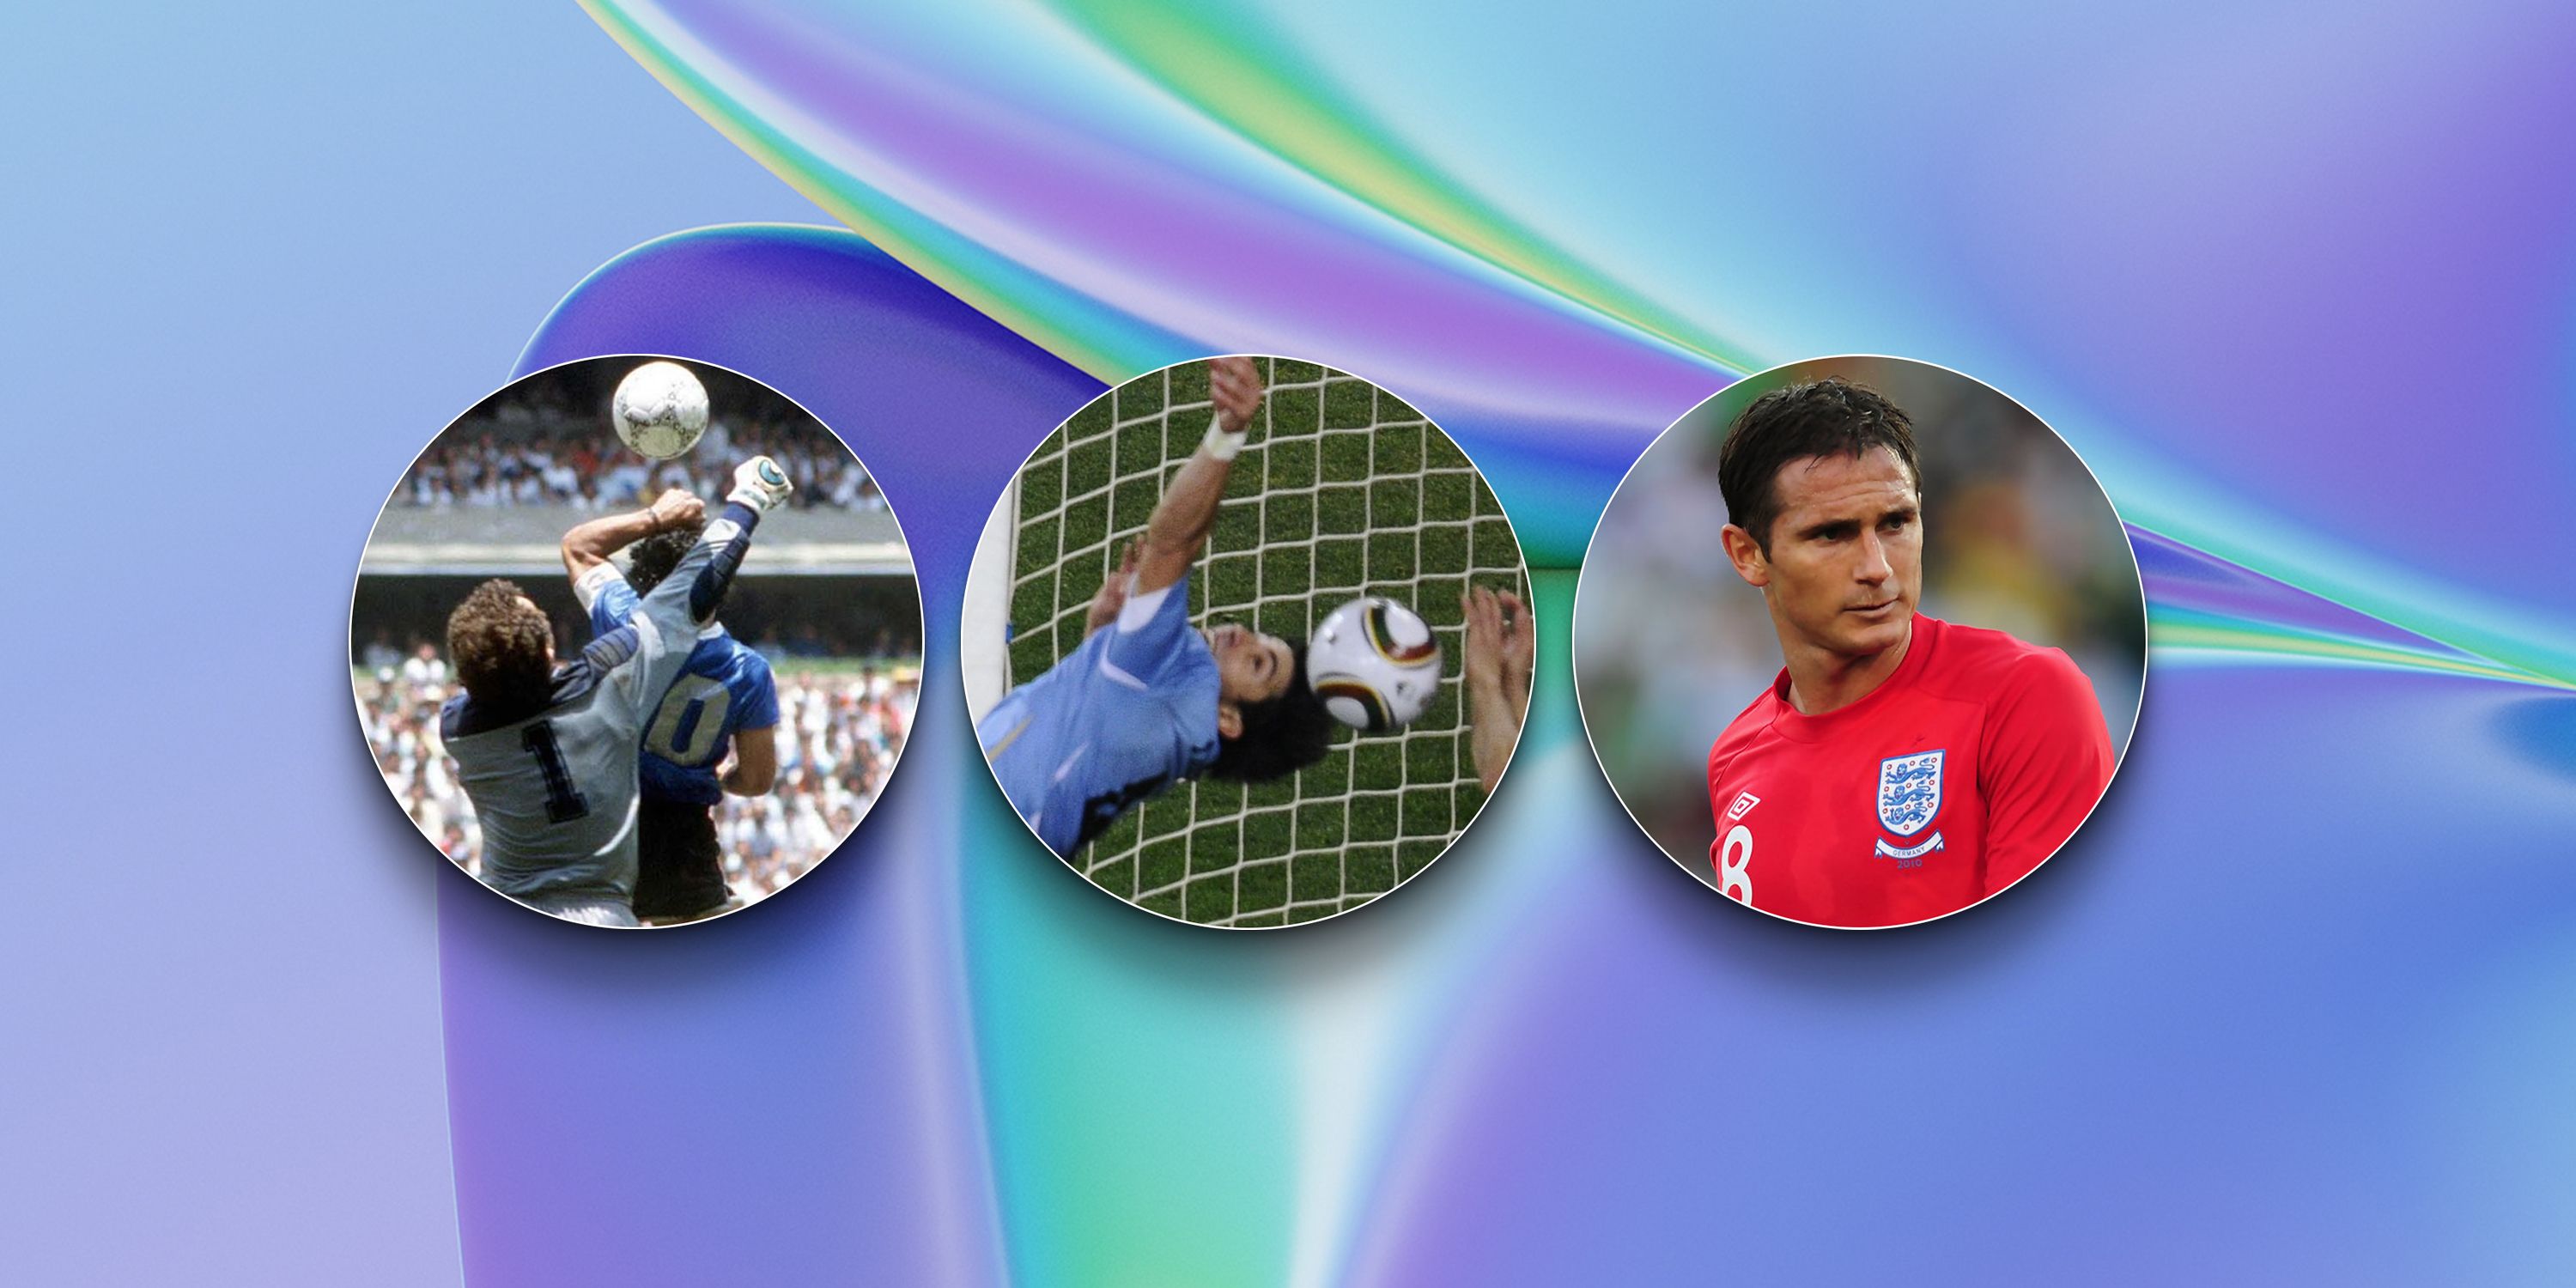 Composite image of the most controversial moments in World Cup history, including Diego Maradona's 'Hand of God', Luis Suarez's handball for Uruguay and Frank Lampard's disallowed goal against Germany